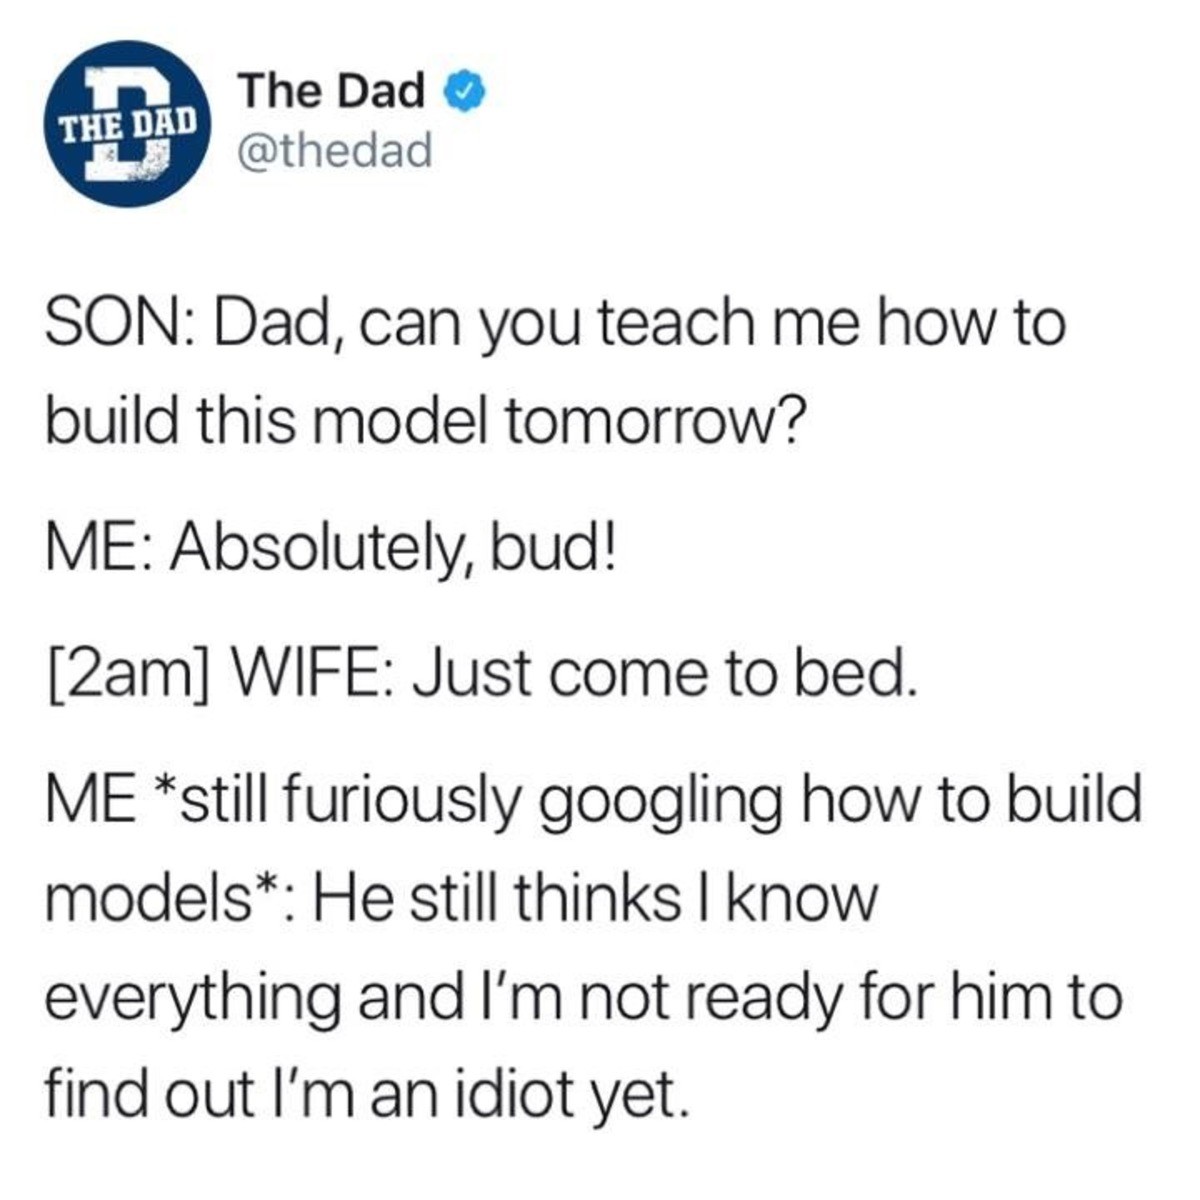 Dad joke - The Dad The Dad Son Dad, can you teach me how to build this model tomorrow? Me Absolutely, bud! 2am Wife Just come to bed. Me still furiously googling how to build models He still thinks I know everything and I'm not ready for him to find out I